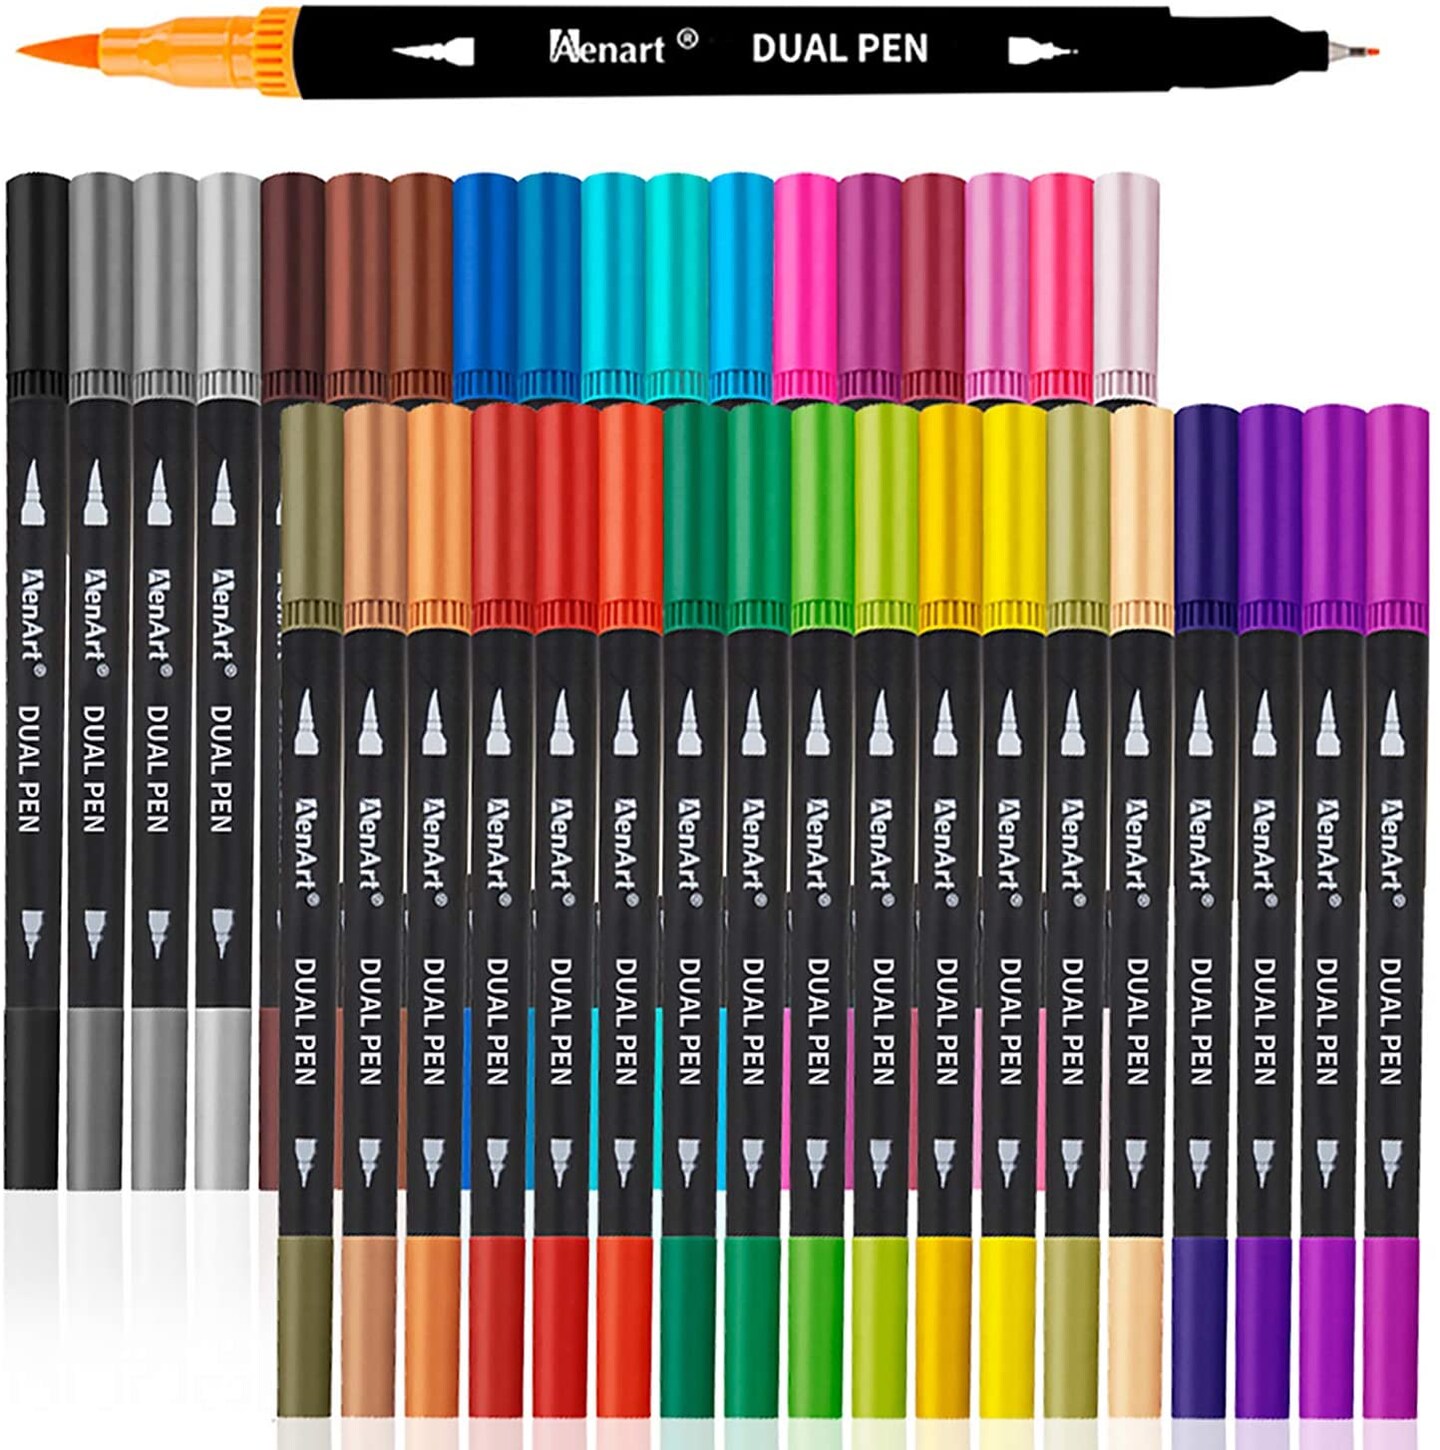 RIANCY Gel Pens Fine Point Colored Pens Tip 0.5mm Colored Ink Ballpoint Pen  Coloring Japanese Gel Pen Colorful Pens Great for Kids Adult Doodling